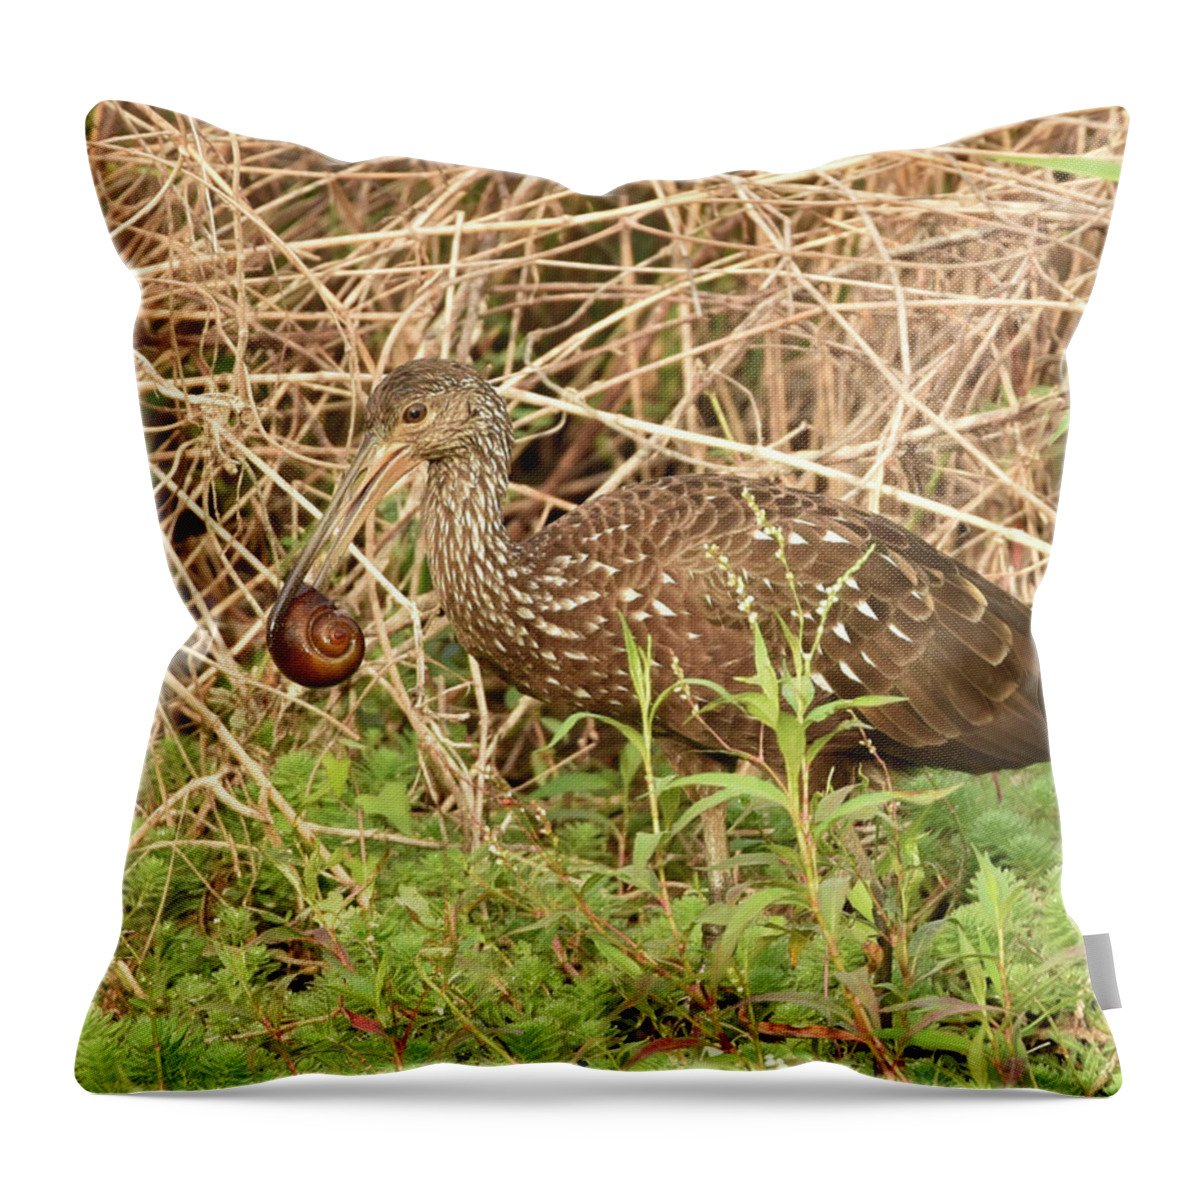 Limpkin Throw Pillow featuring the photograph Limpkin Eating an Apple Snail by Artful Imagery